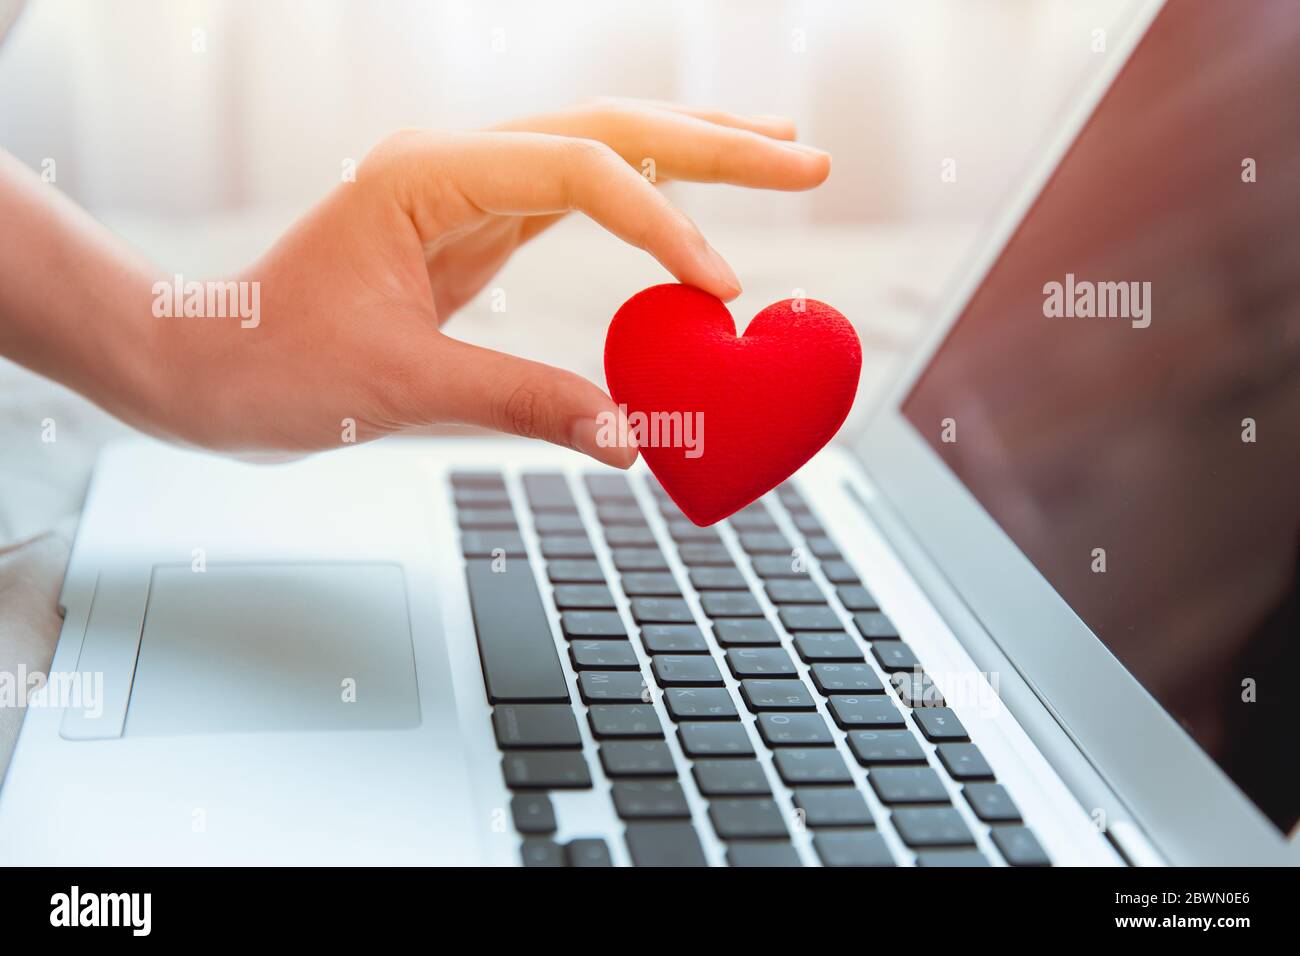 Girl hand take red heart at laptop keyboard for social online love chat and sharing encouragement over internet to fight Covid-19 virus together. Stock Photo